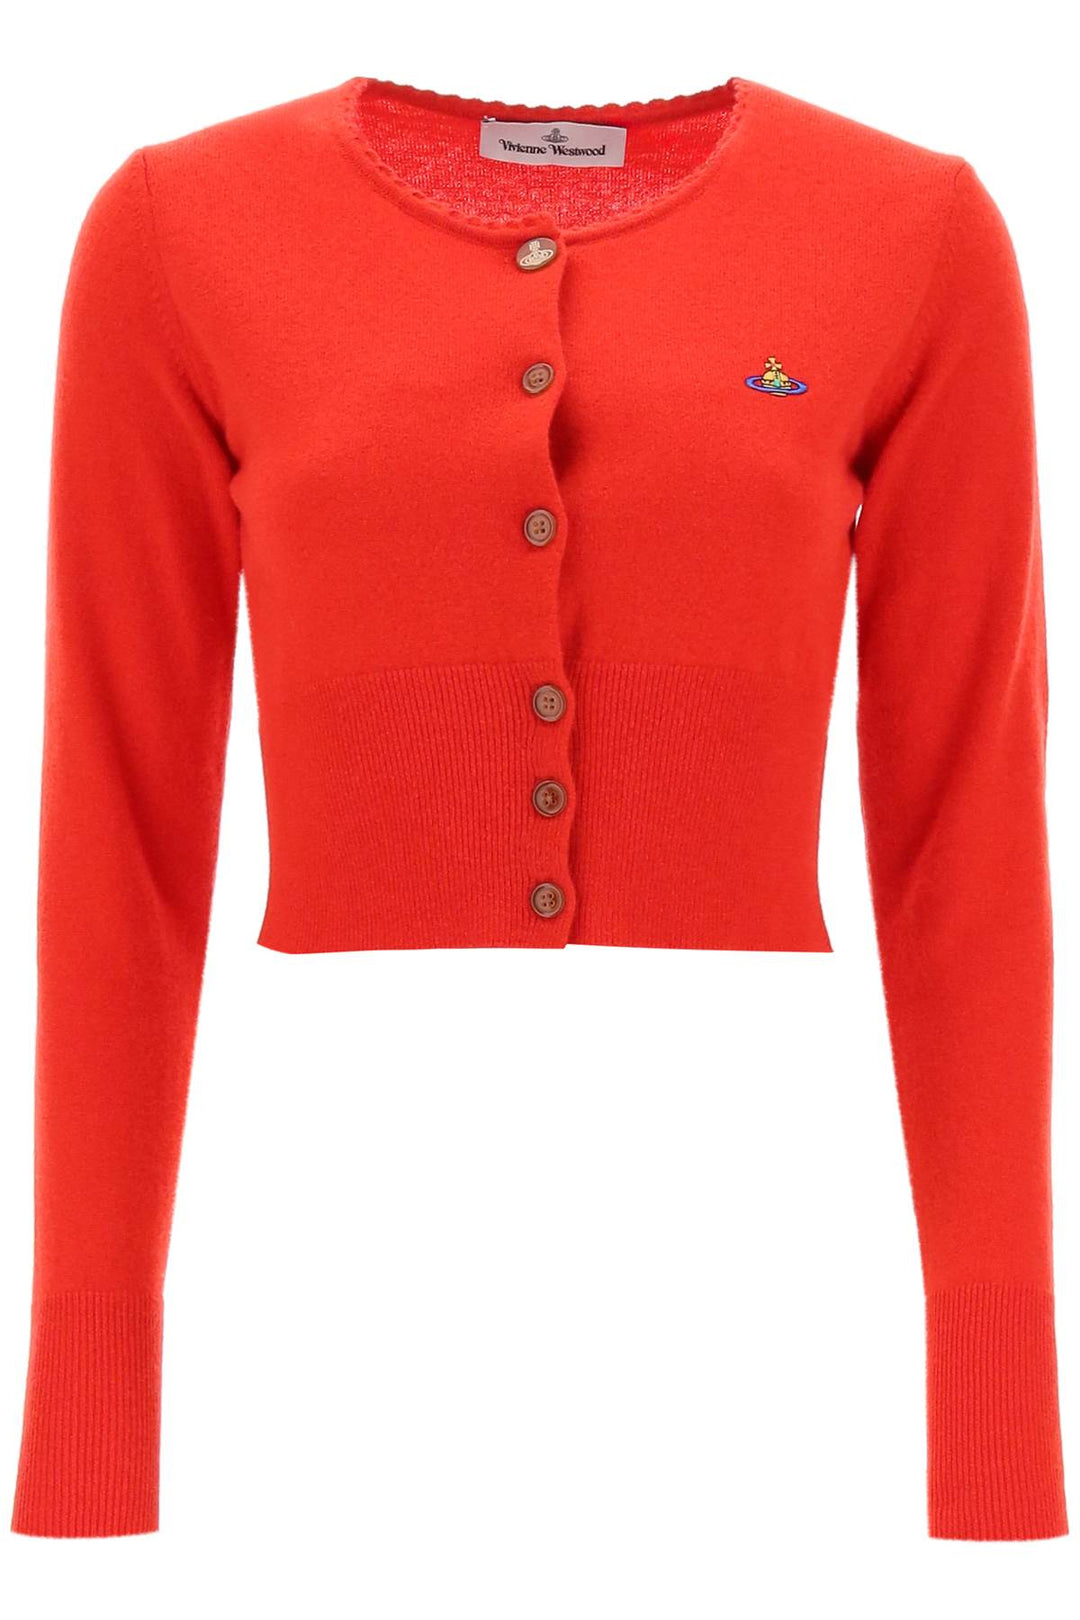 Vivienne Westwood Bea Cropped Cardigan   Rosso